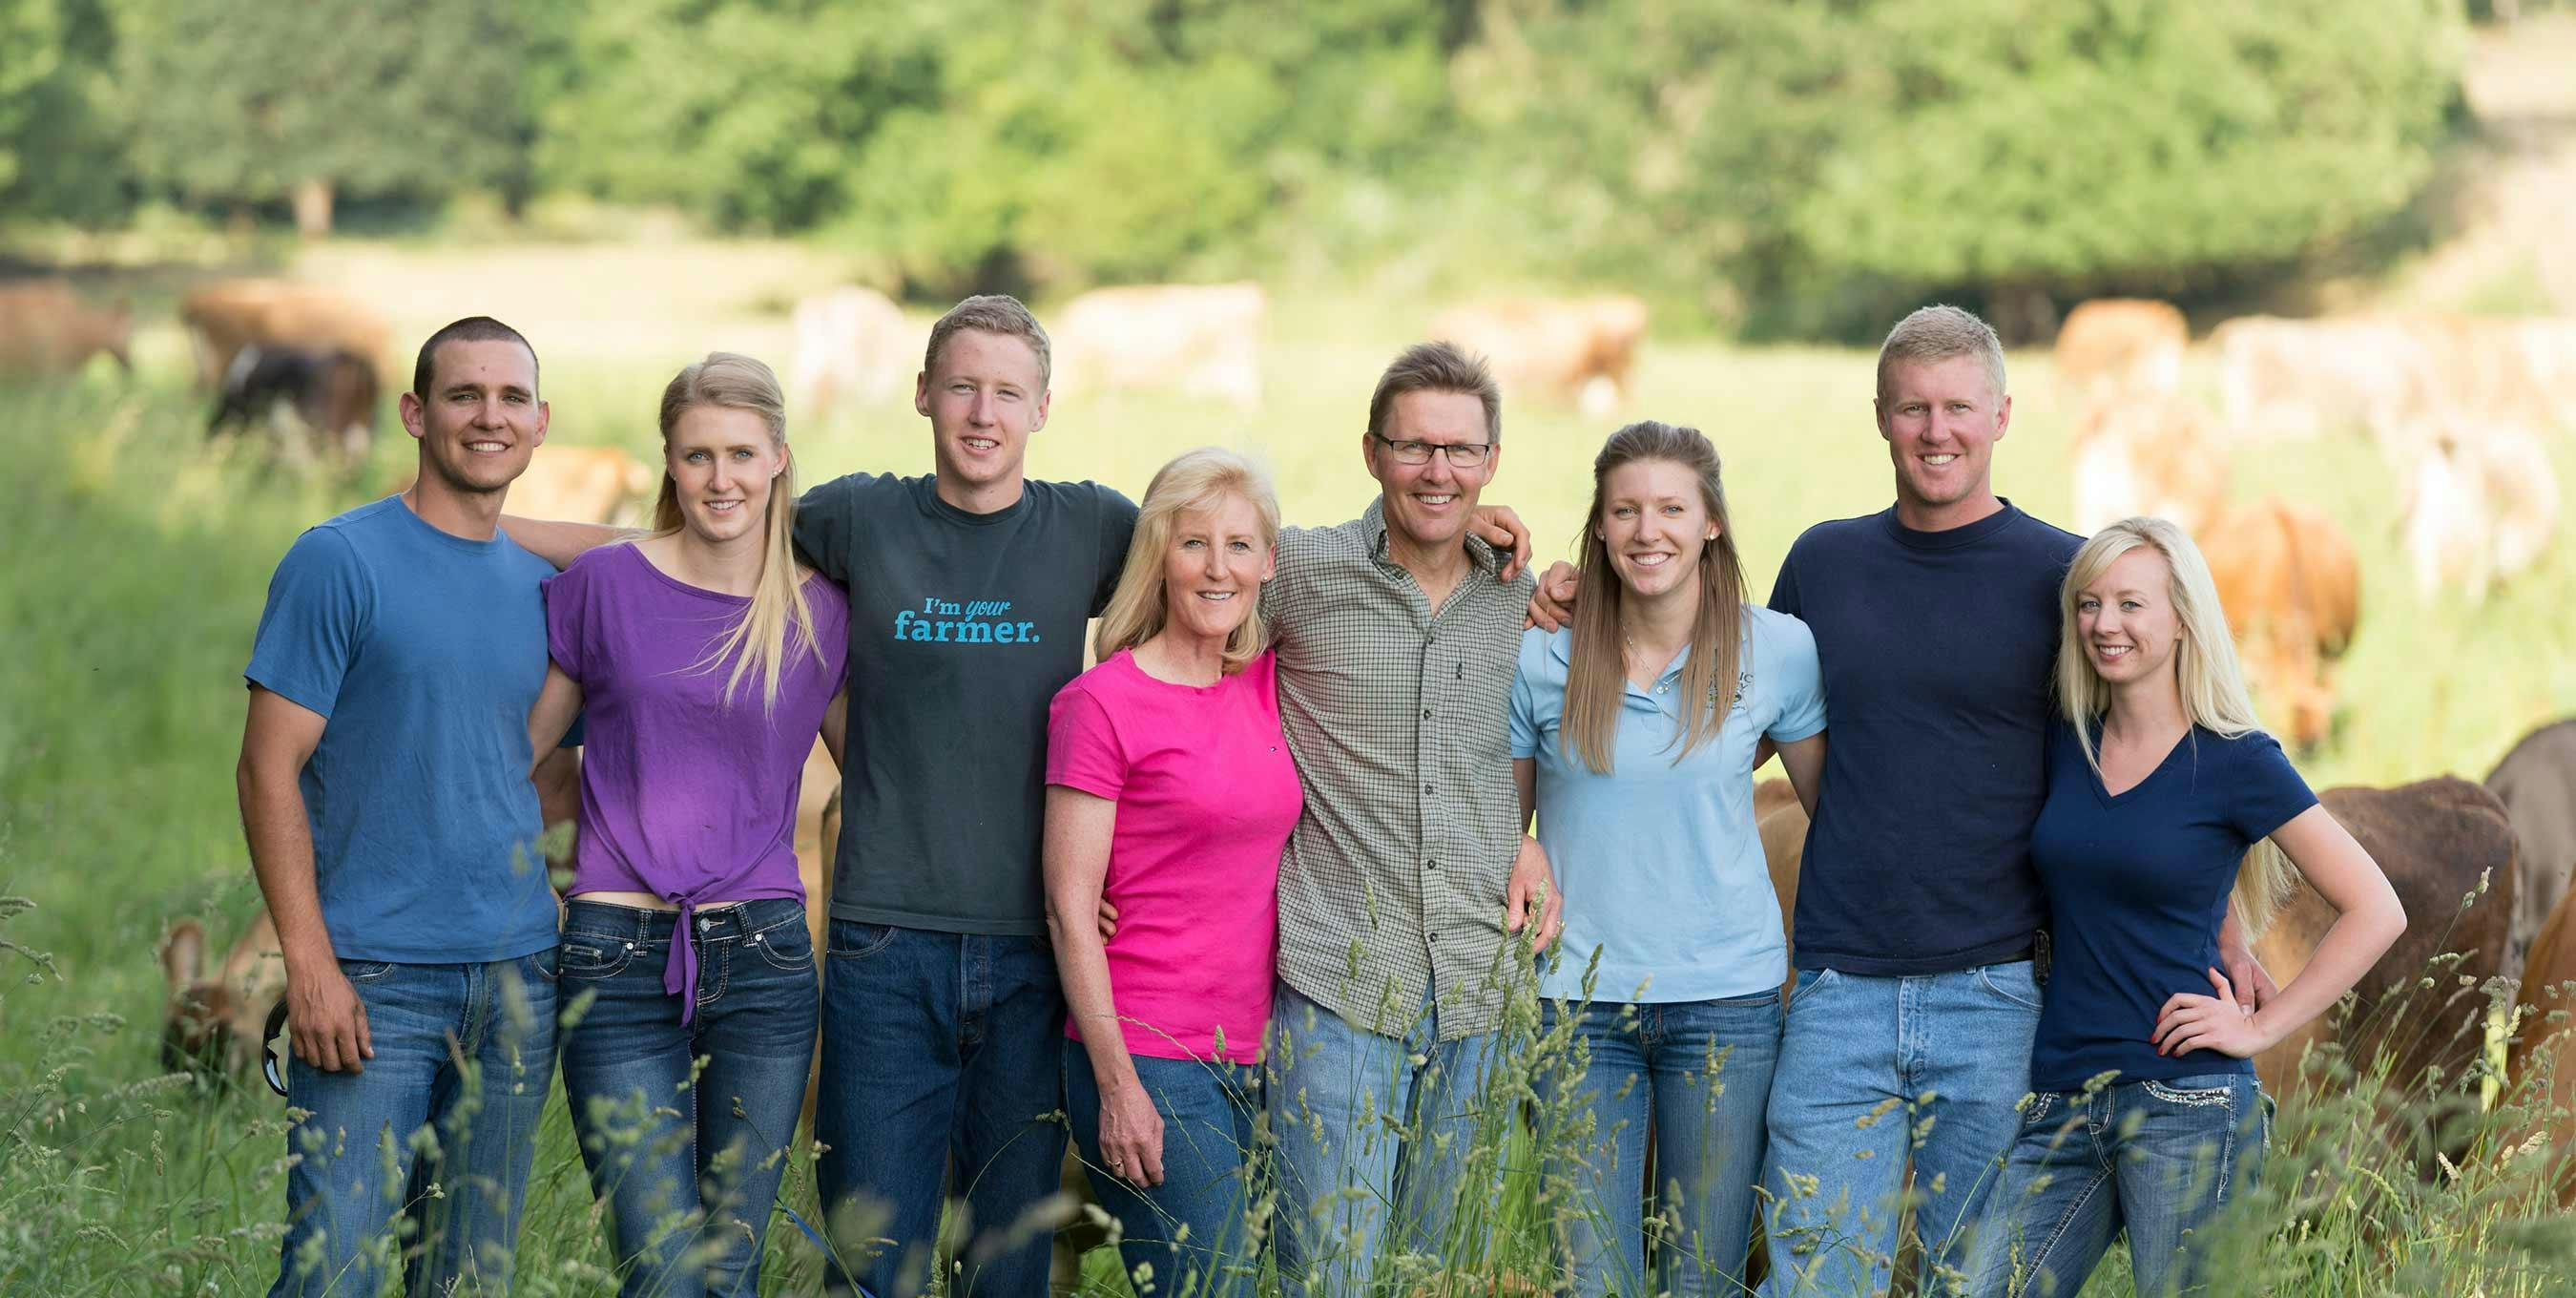 The Bansen Family standing together on their farm, Double J Jerseys, Inc., in Monmouth, OR.